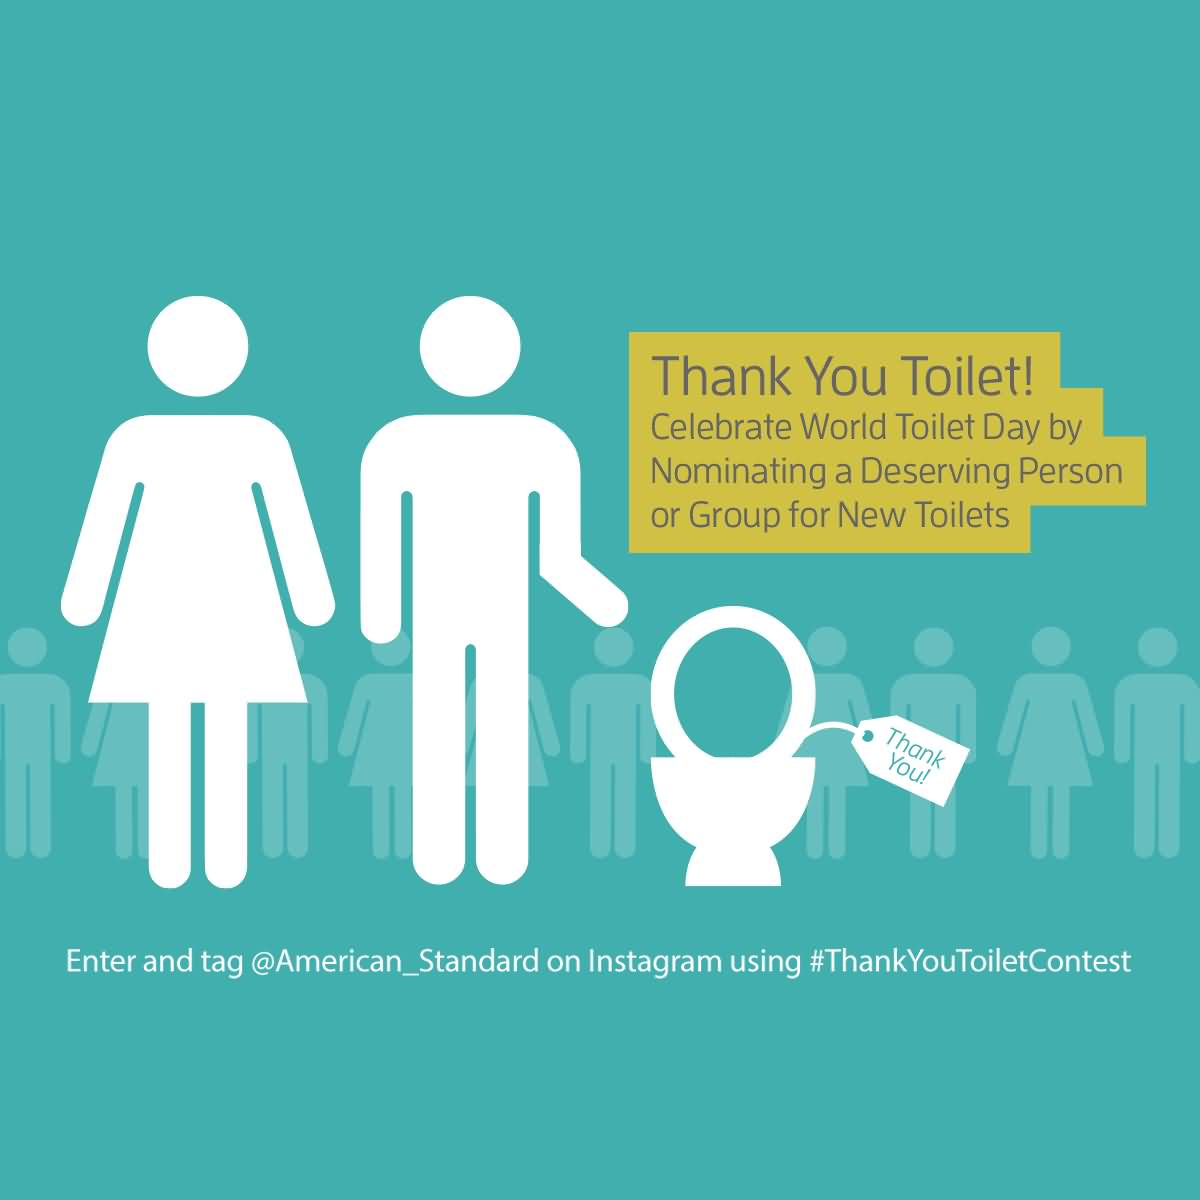 Thank You Toilet Celebrate World Toilet Day By Nominating A Deserving Person Or Group For New Toilets